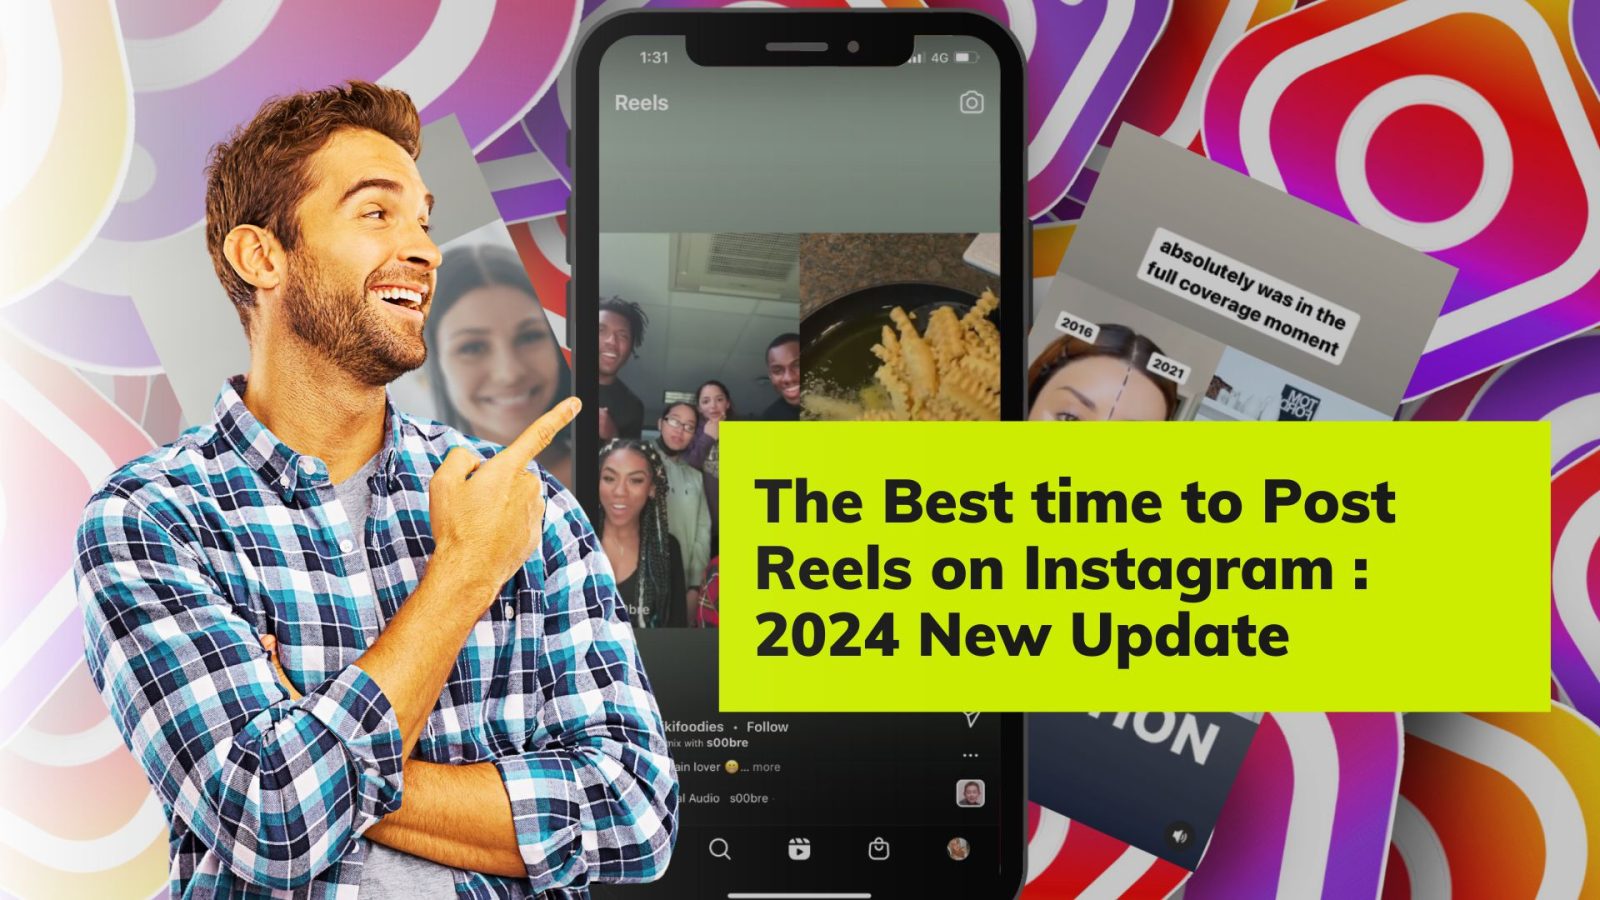 The Best time to Post Reels on Instagram 2024 New Update